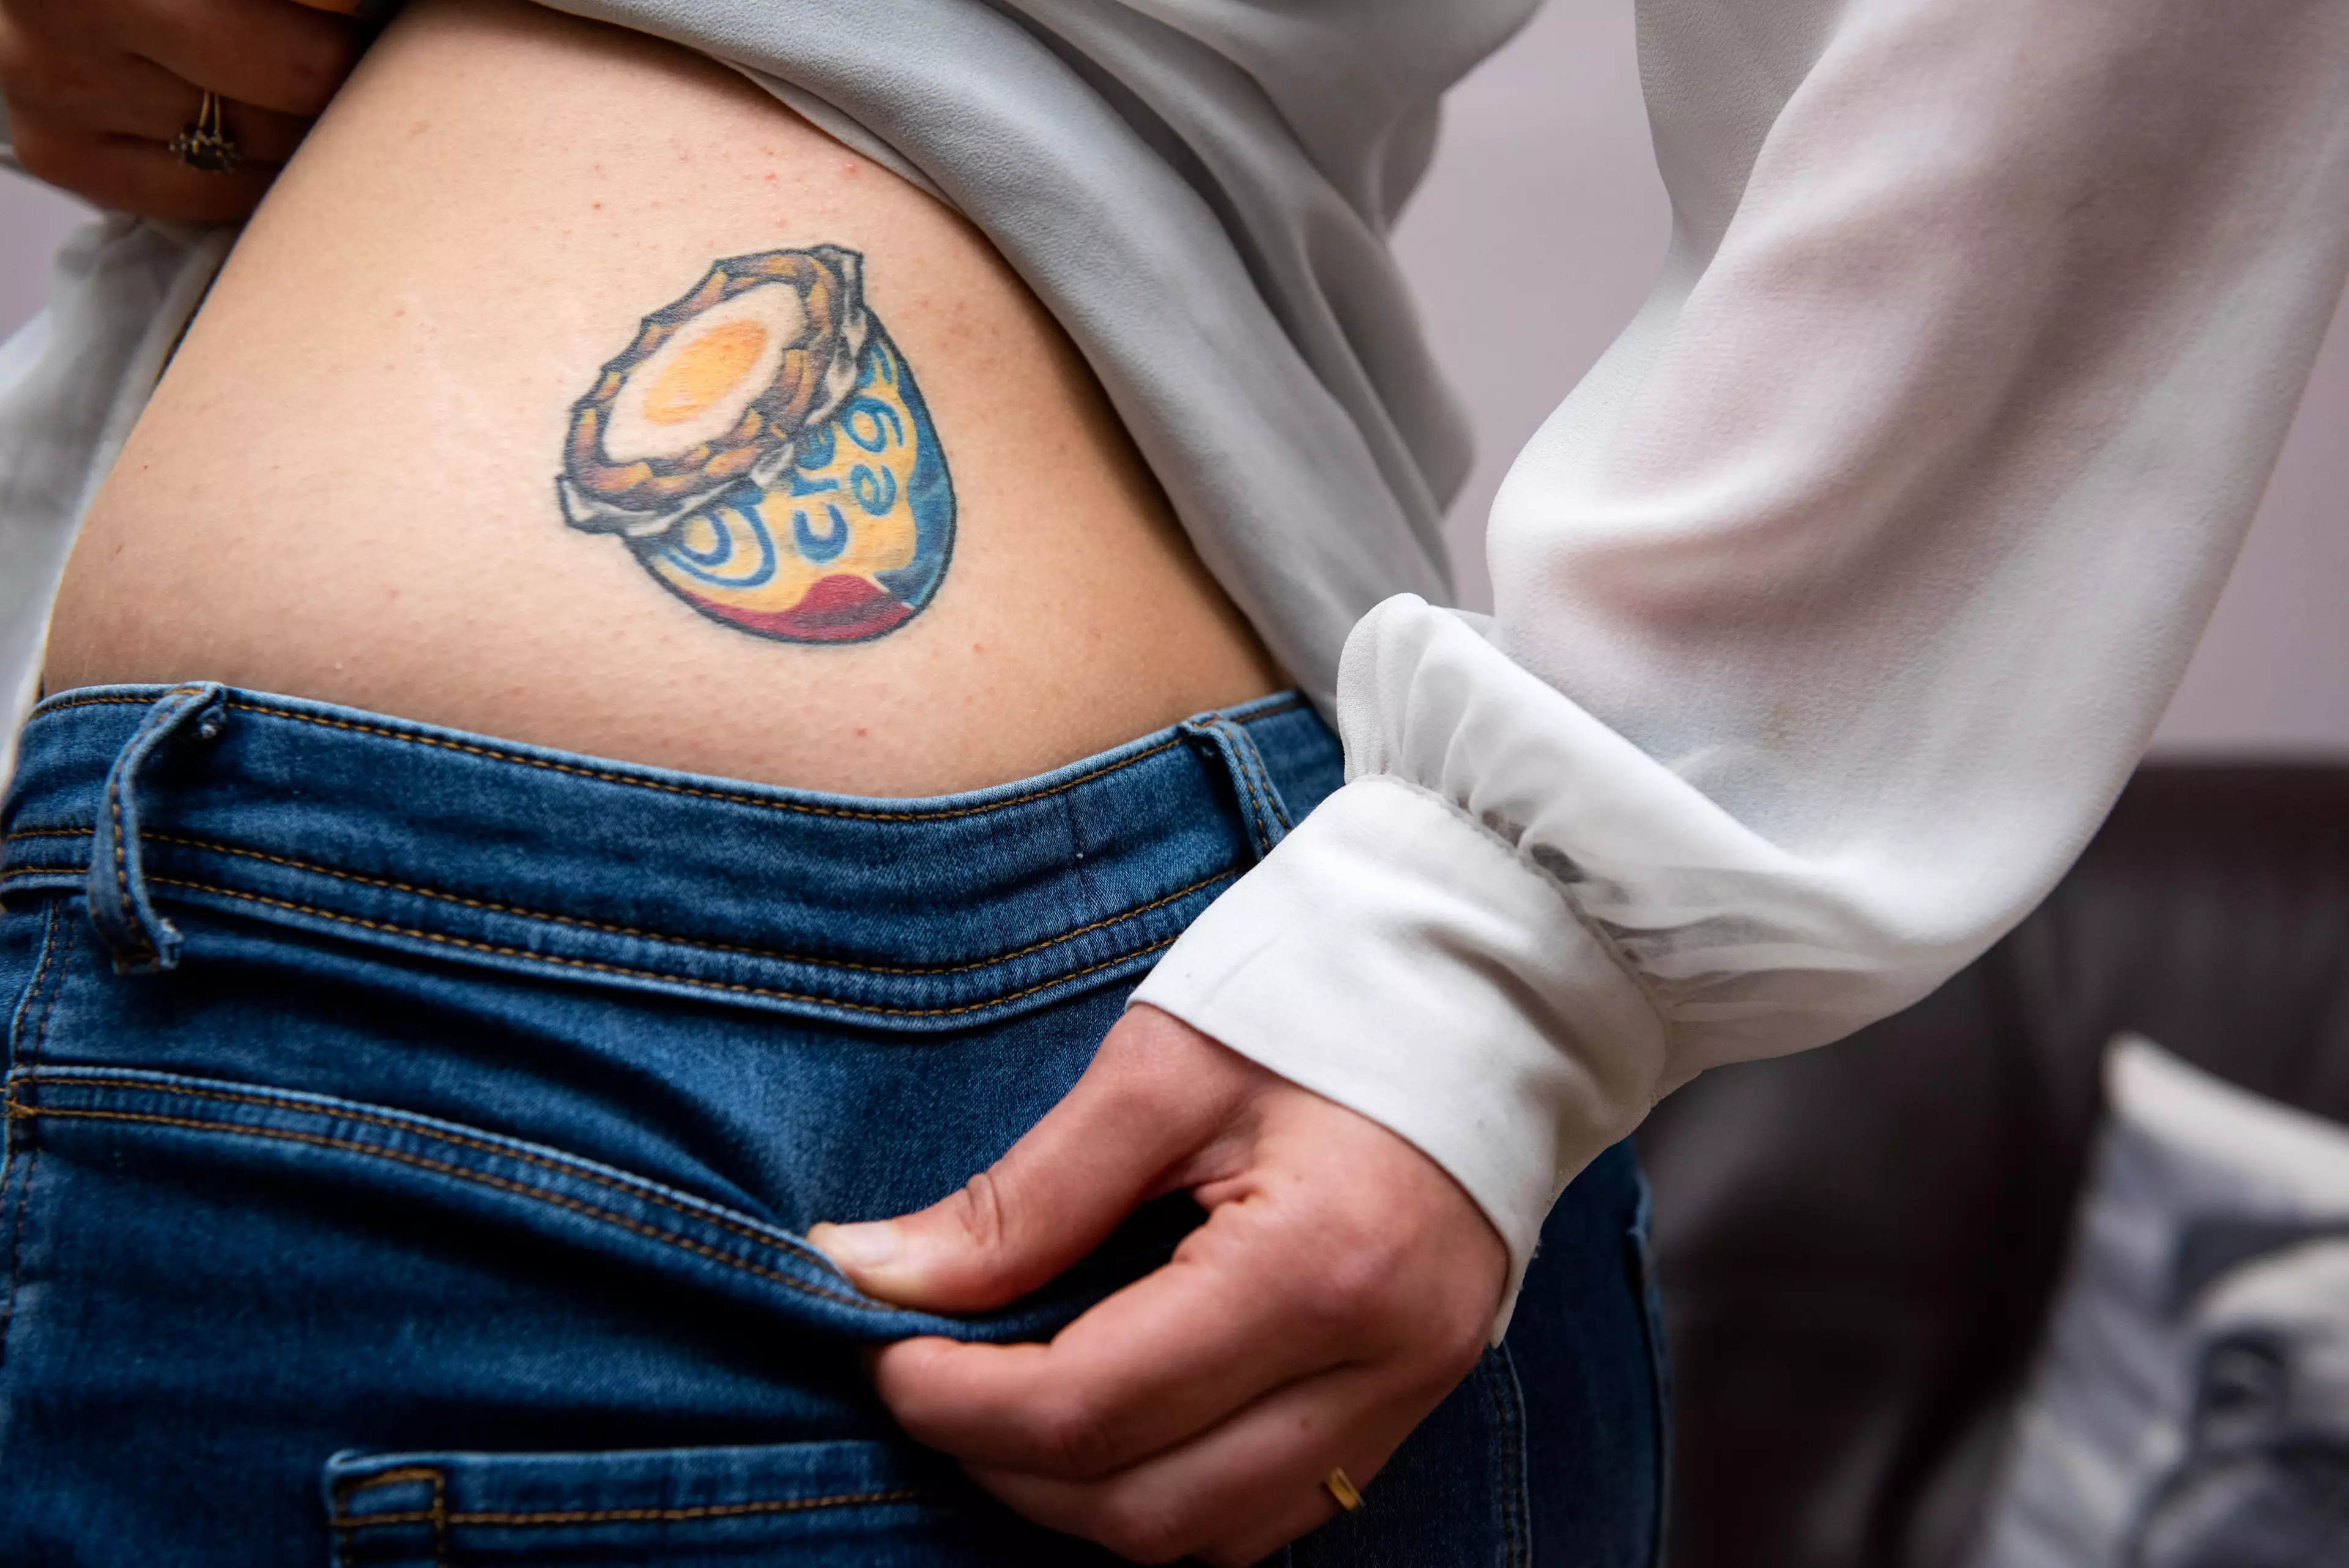 Tattoo of a Cadbury Creme Egg? Well, why not?